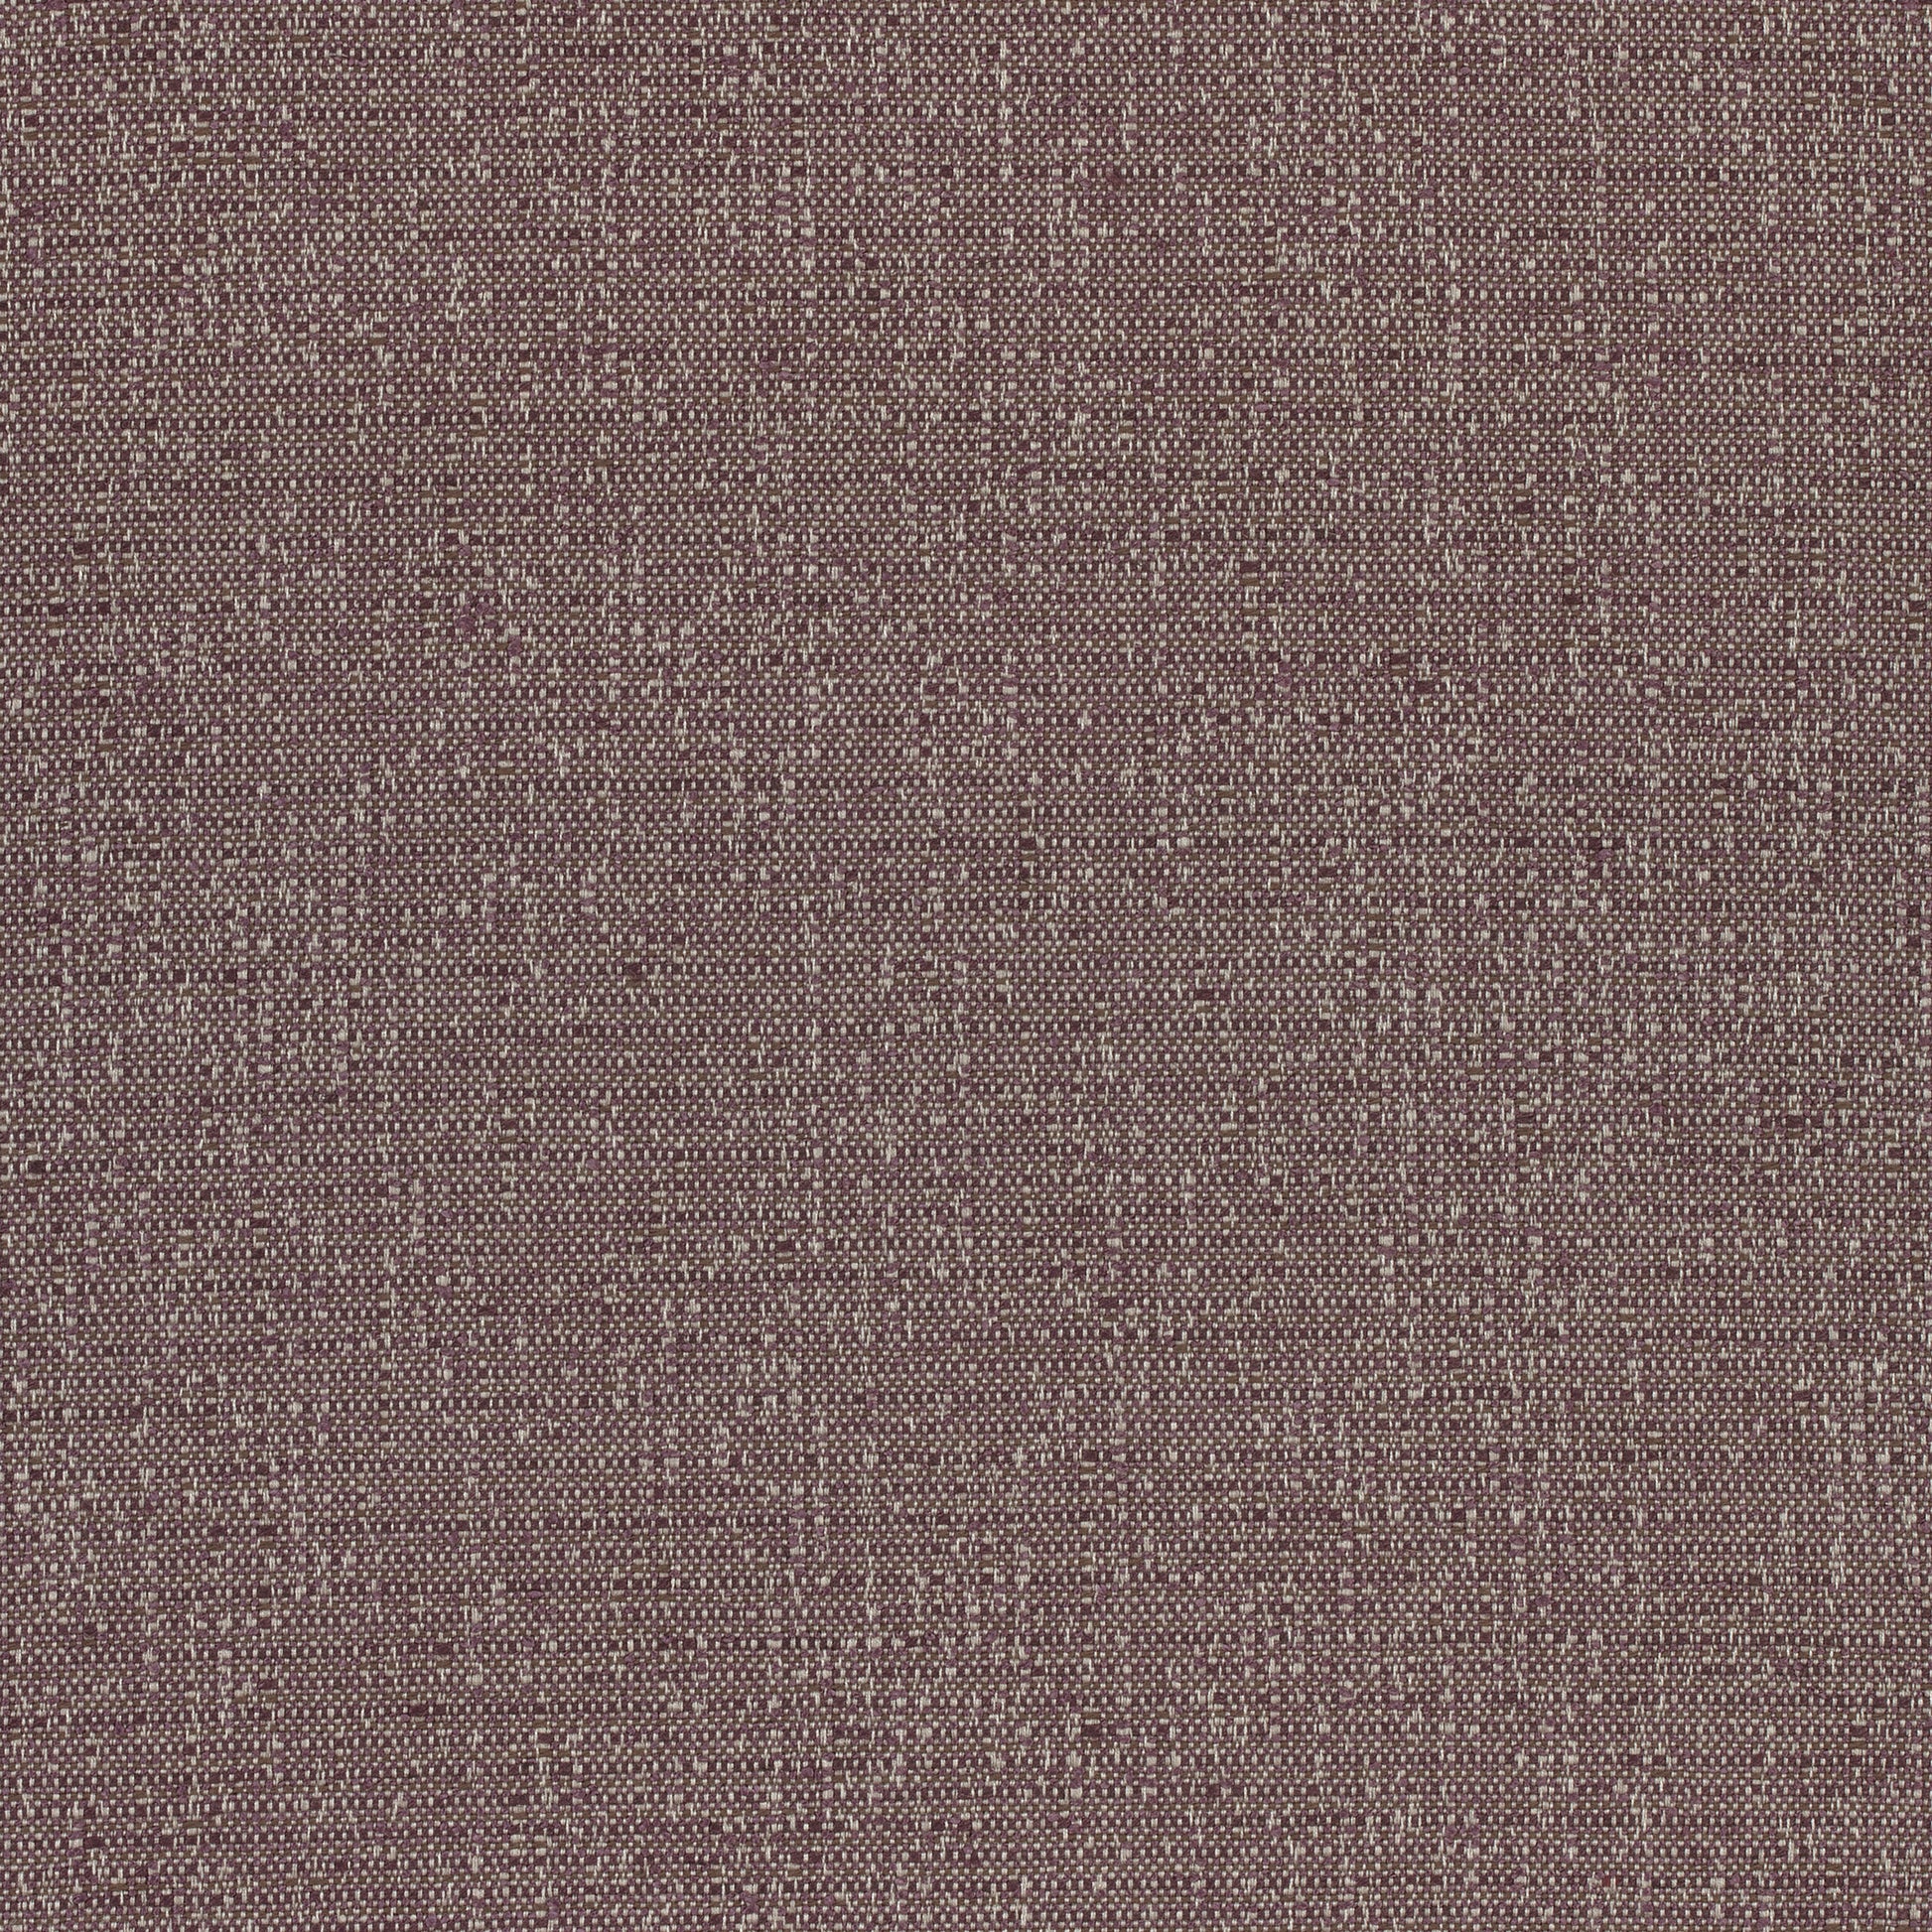 Purchase Thibaut Fabric SKU W74060 pattern name Everly color Plum